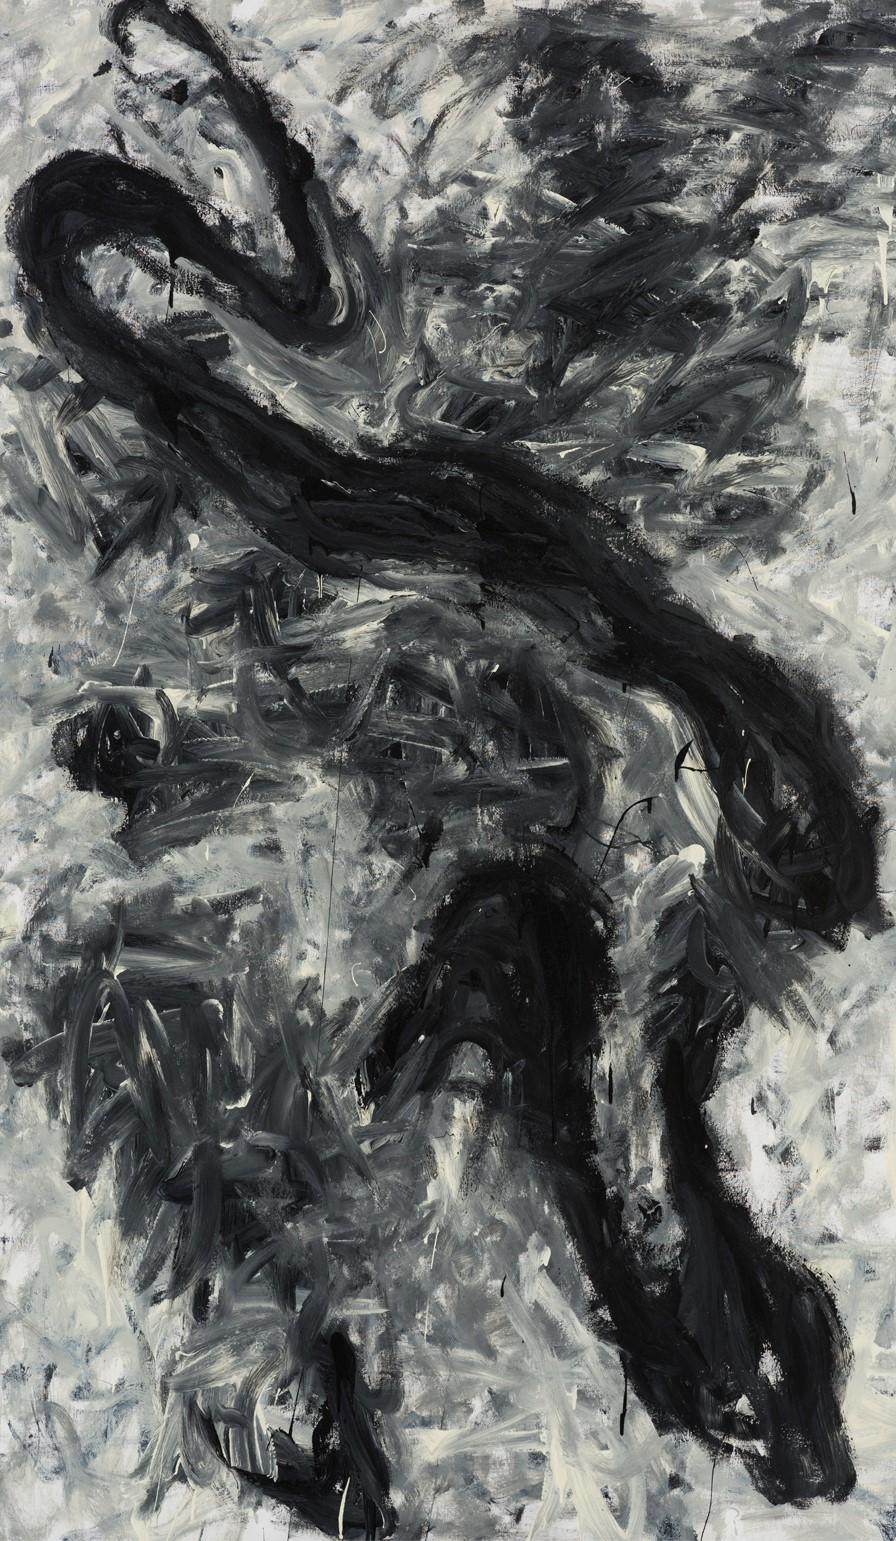 Untitled 03 [Remains of the Remains 03] - Contemporary, Abstract, Black, Gray - Painting by Zsolt Berszán